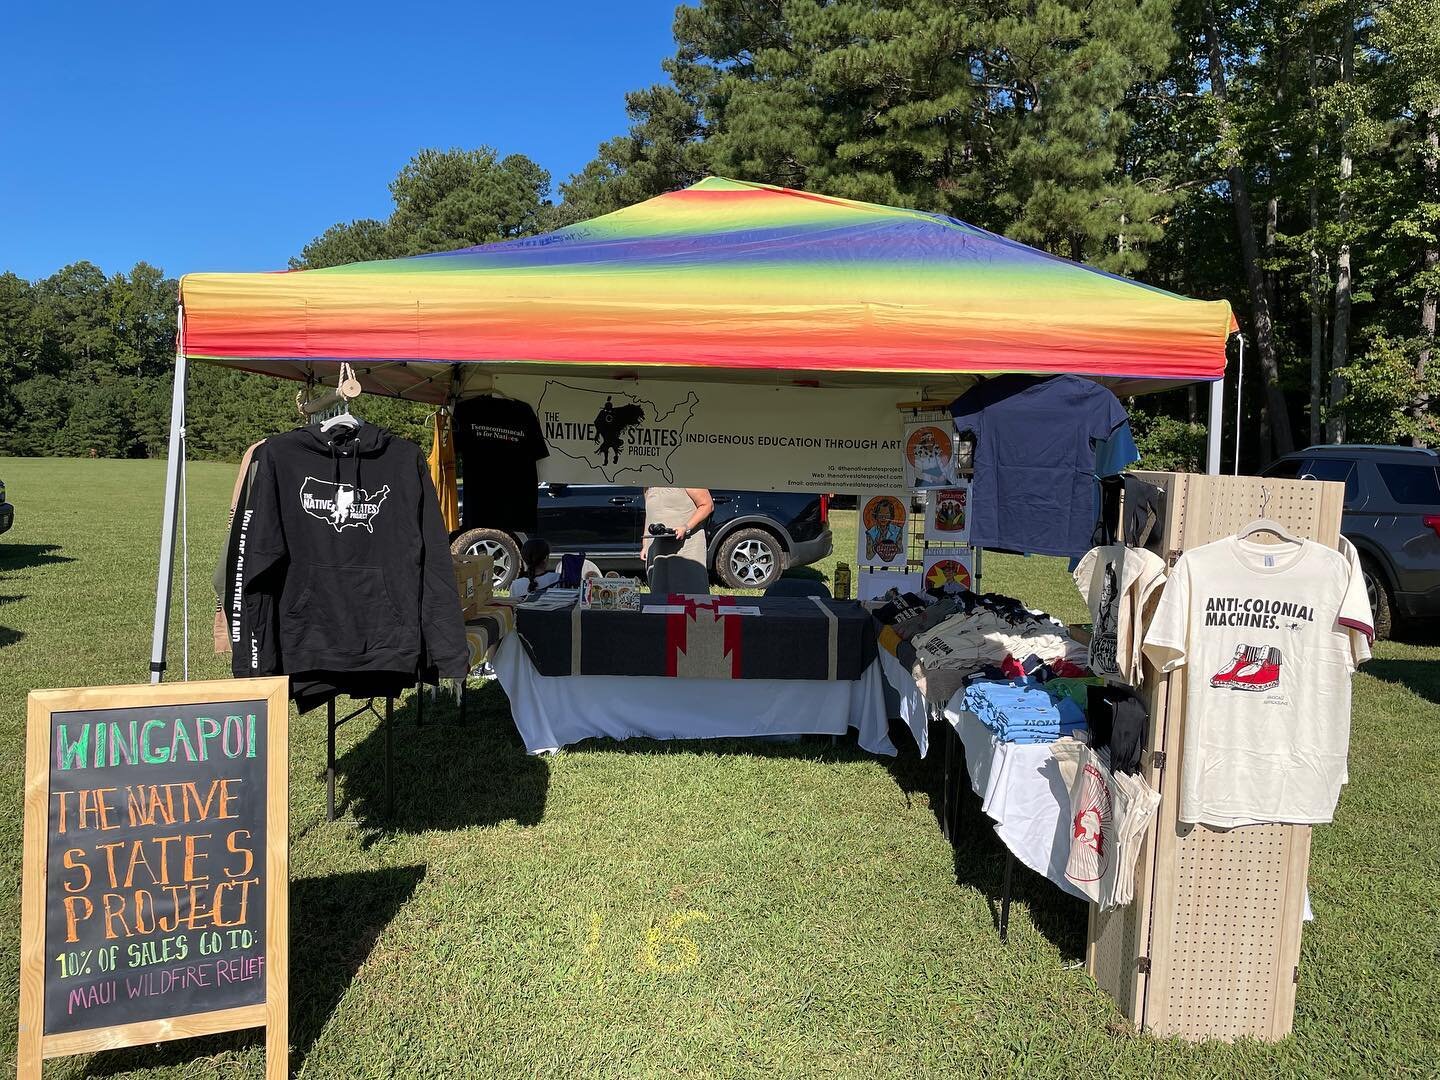 We are at the Nottoway tribe annual pow wow in Surry county! Only an hour away from Richmond and Hampton roads! Come out and check it out! #nottowaytribe #pamunkey #powwowlife